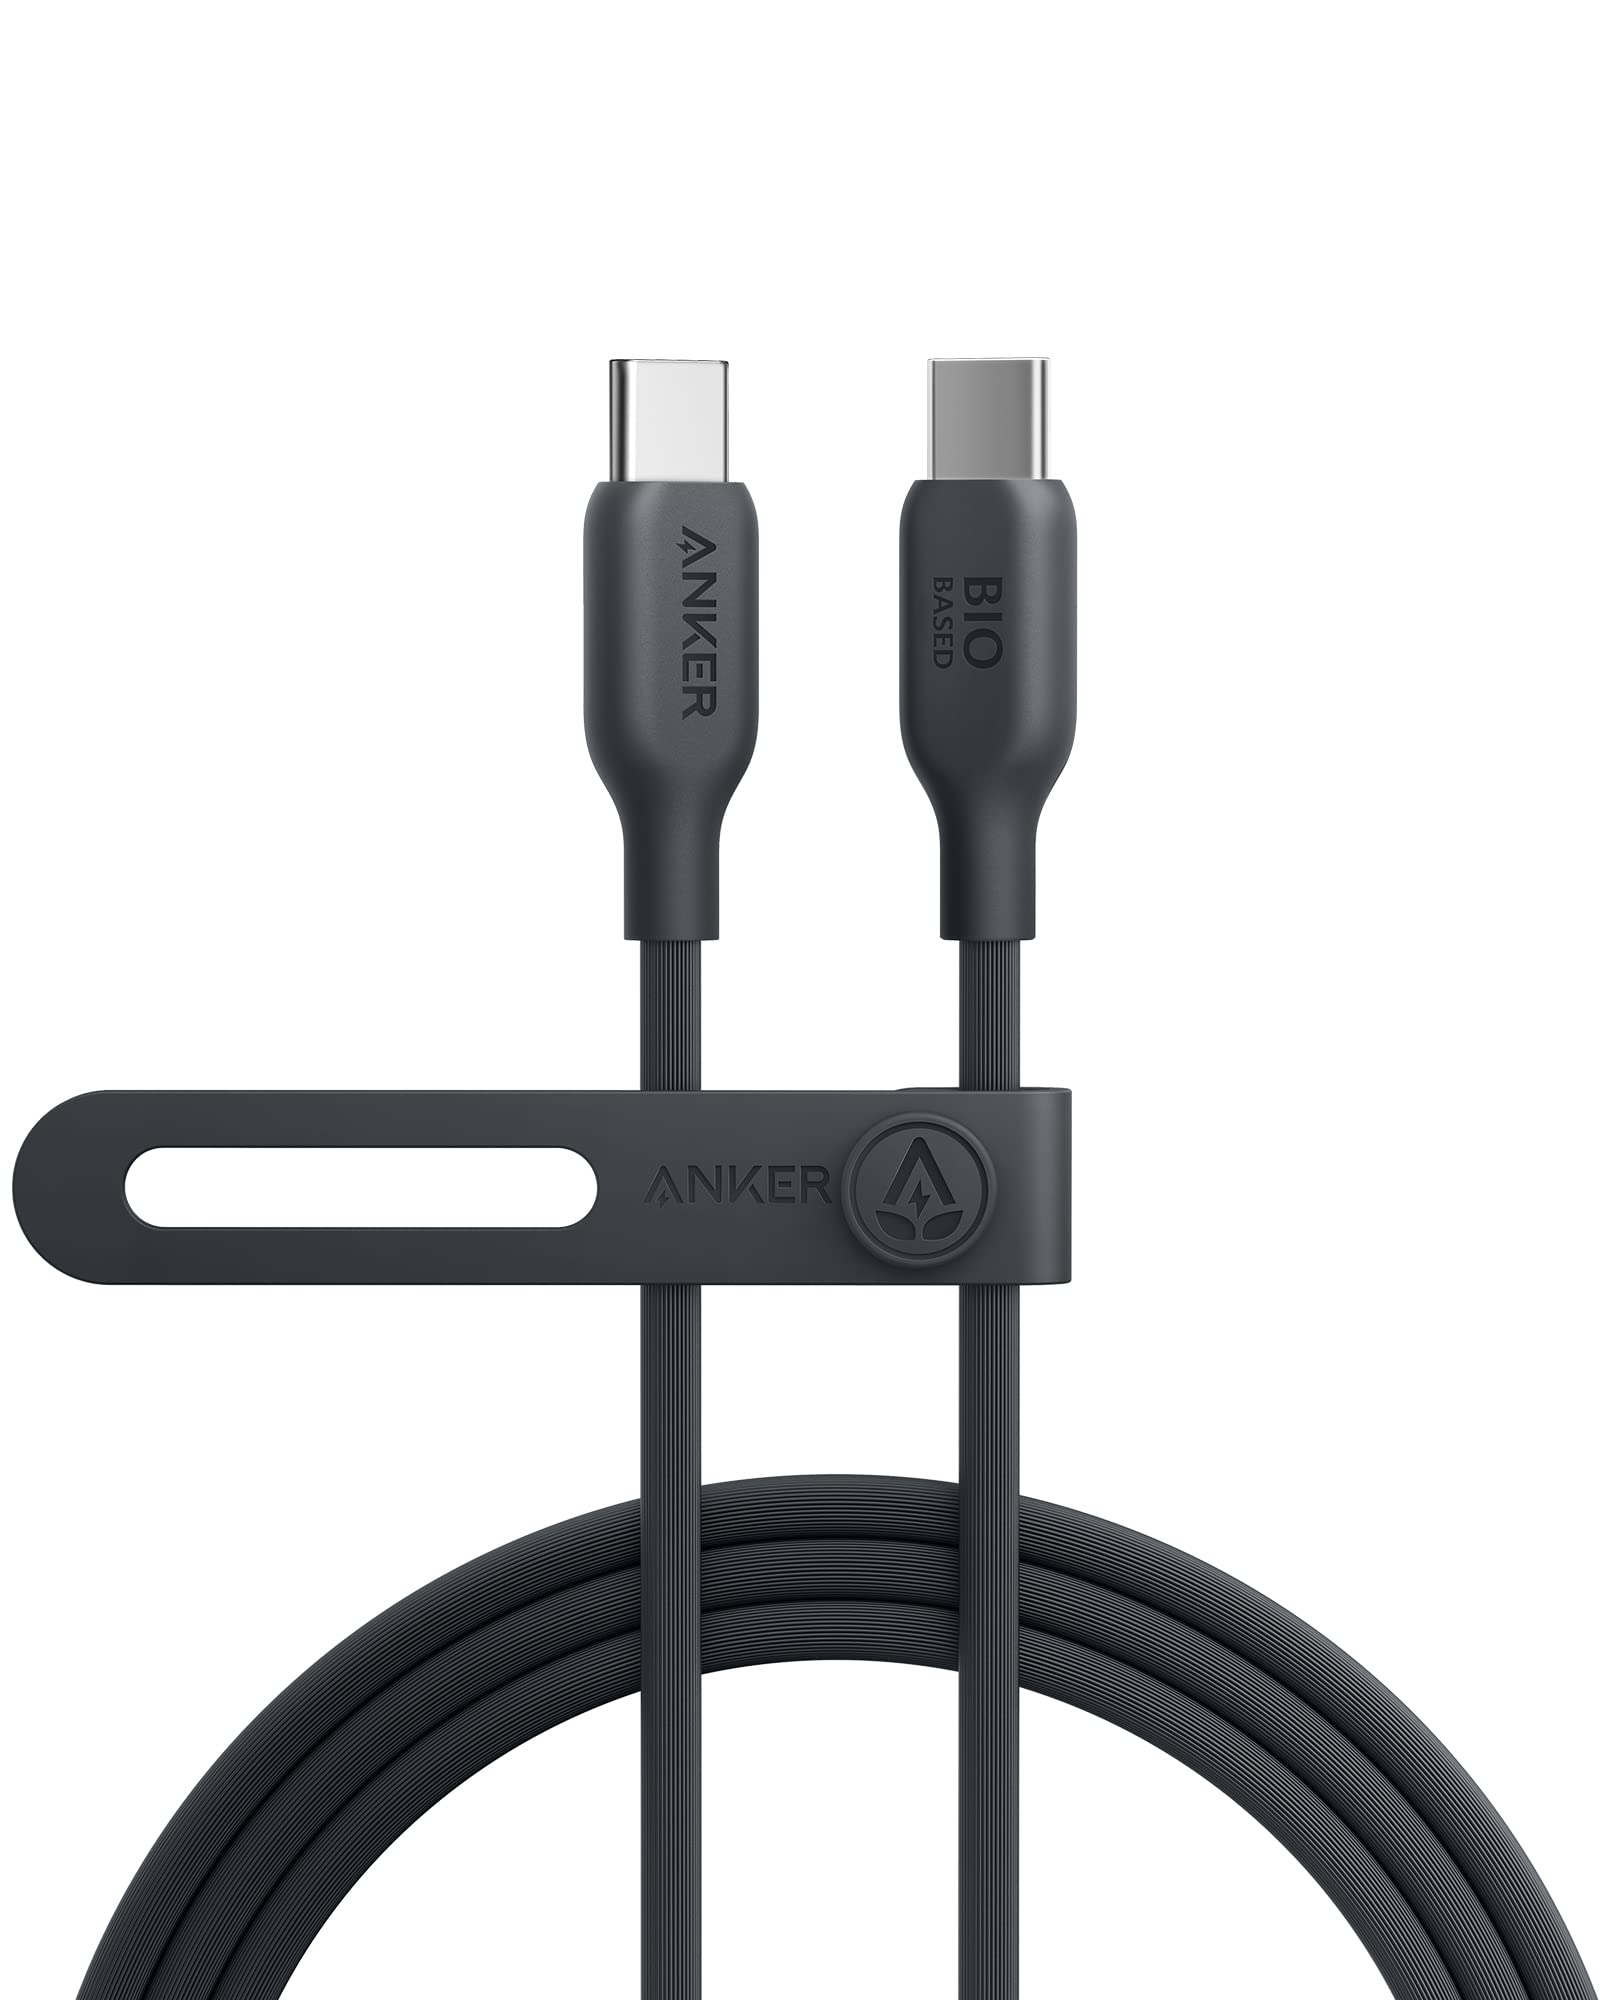 Anker 543 USB C to USB C Cable (140W 6ft), USB 2.0 Bio-Based Charging Cable for MacBook Pro 2020, iPad Pro 2020, iPad Air 4, Samsung Galaxy S23+/S23 Ultra/S22 Ultra (Phantom Black)